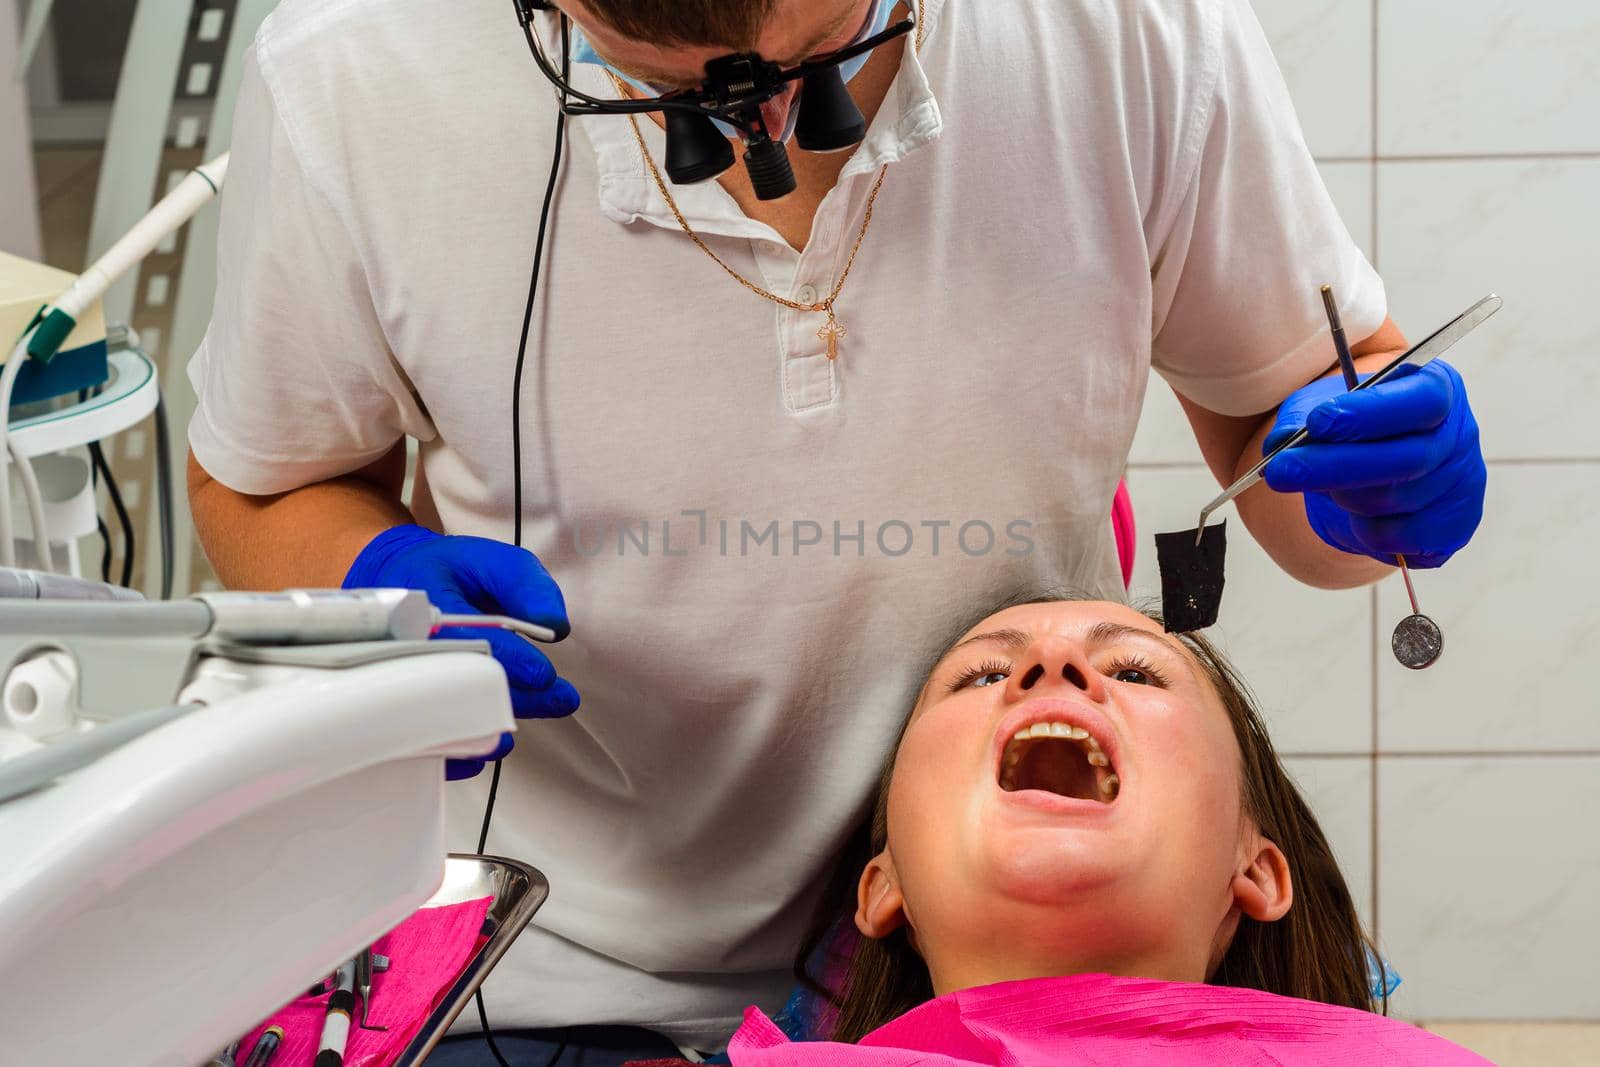 After filling, the dentist removes the excess material from the tooth with a copying tracing paper.2020